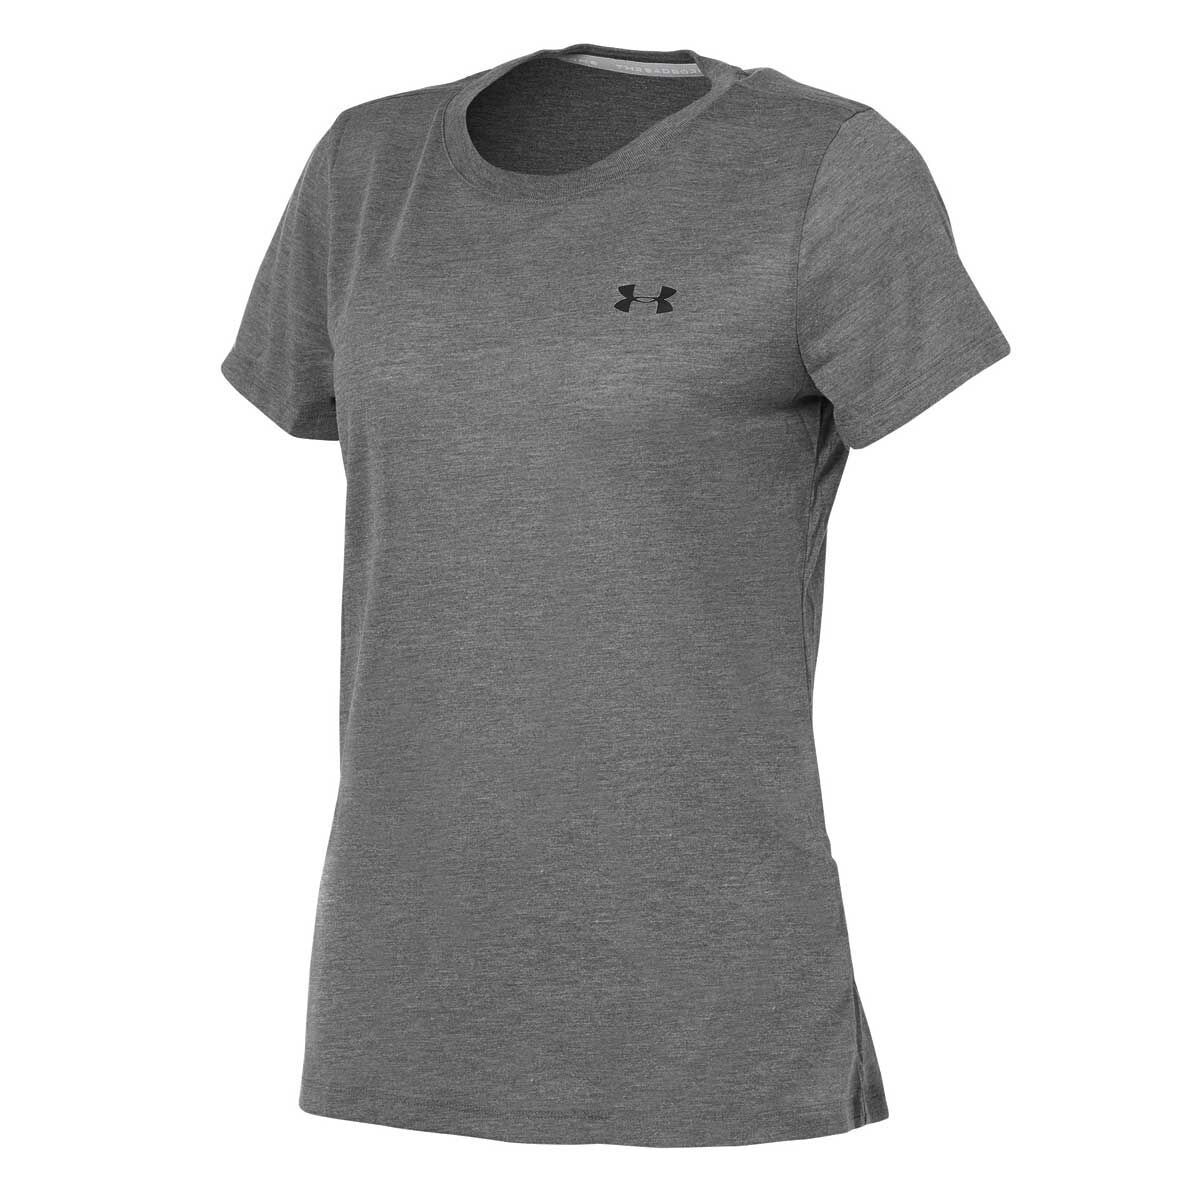 under armour women's tees